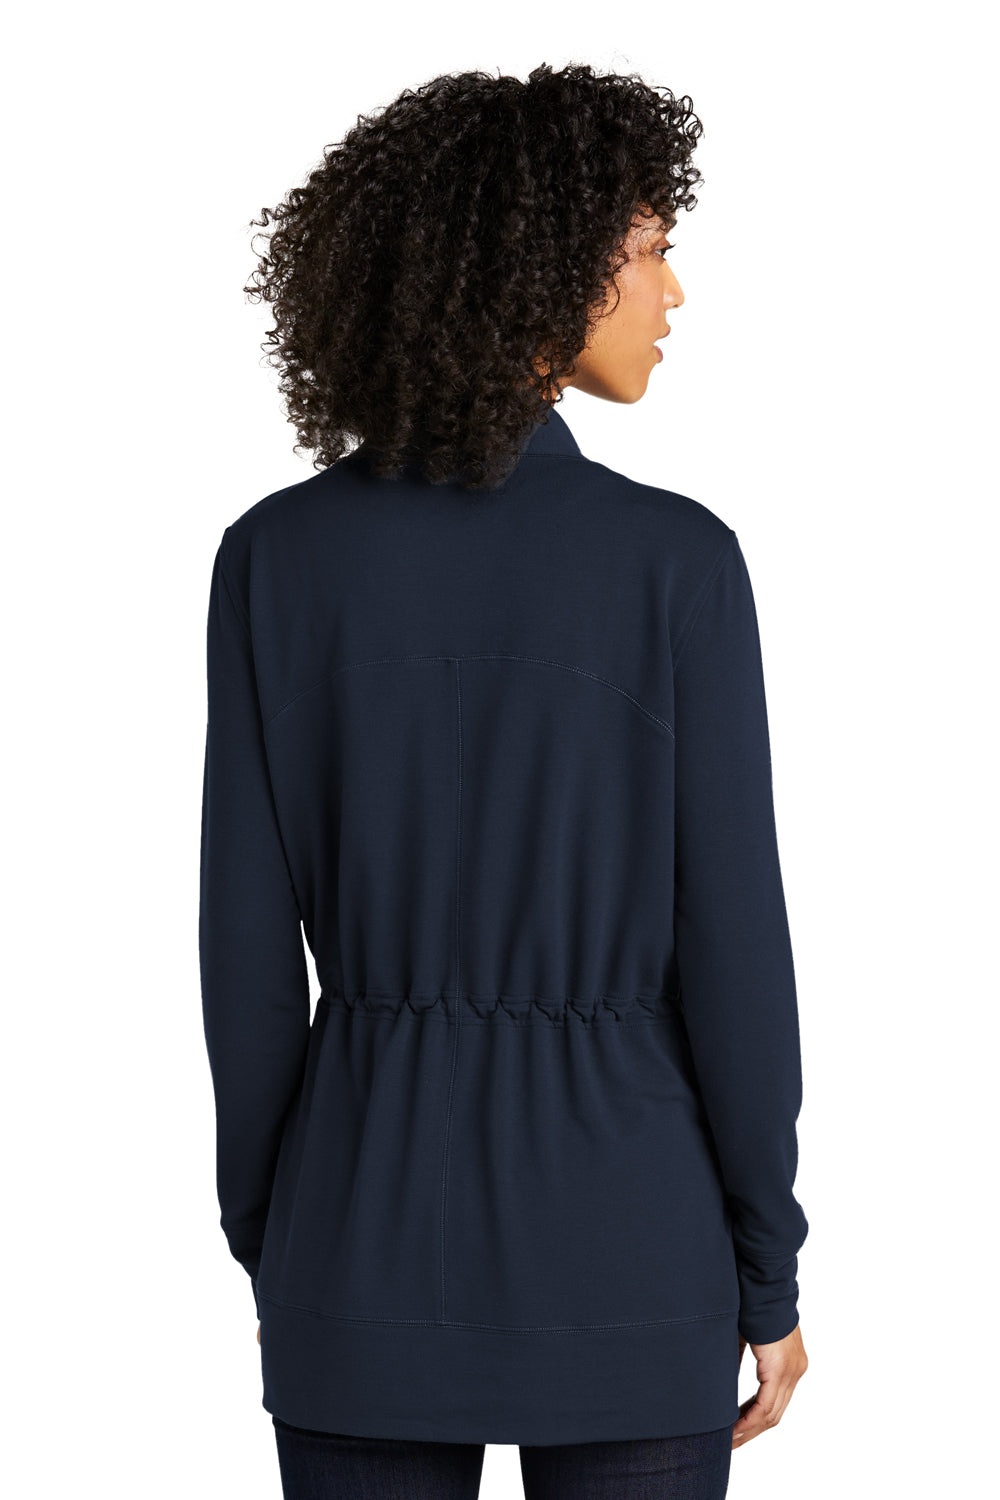 Port Authority LK825 Microterry Long Sleve Cardigan Sweater River Navy Blue Back